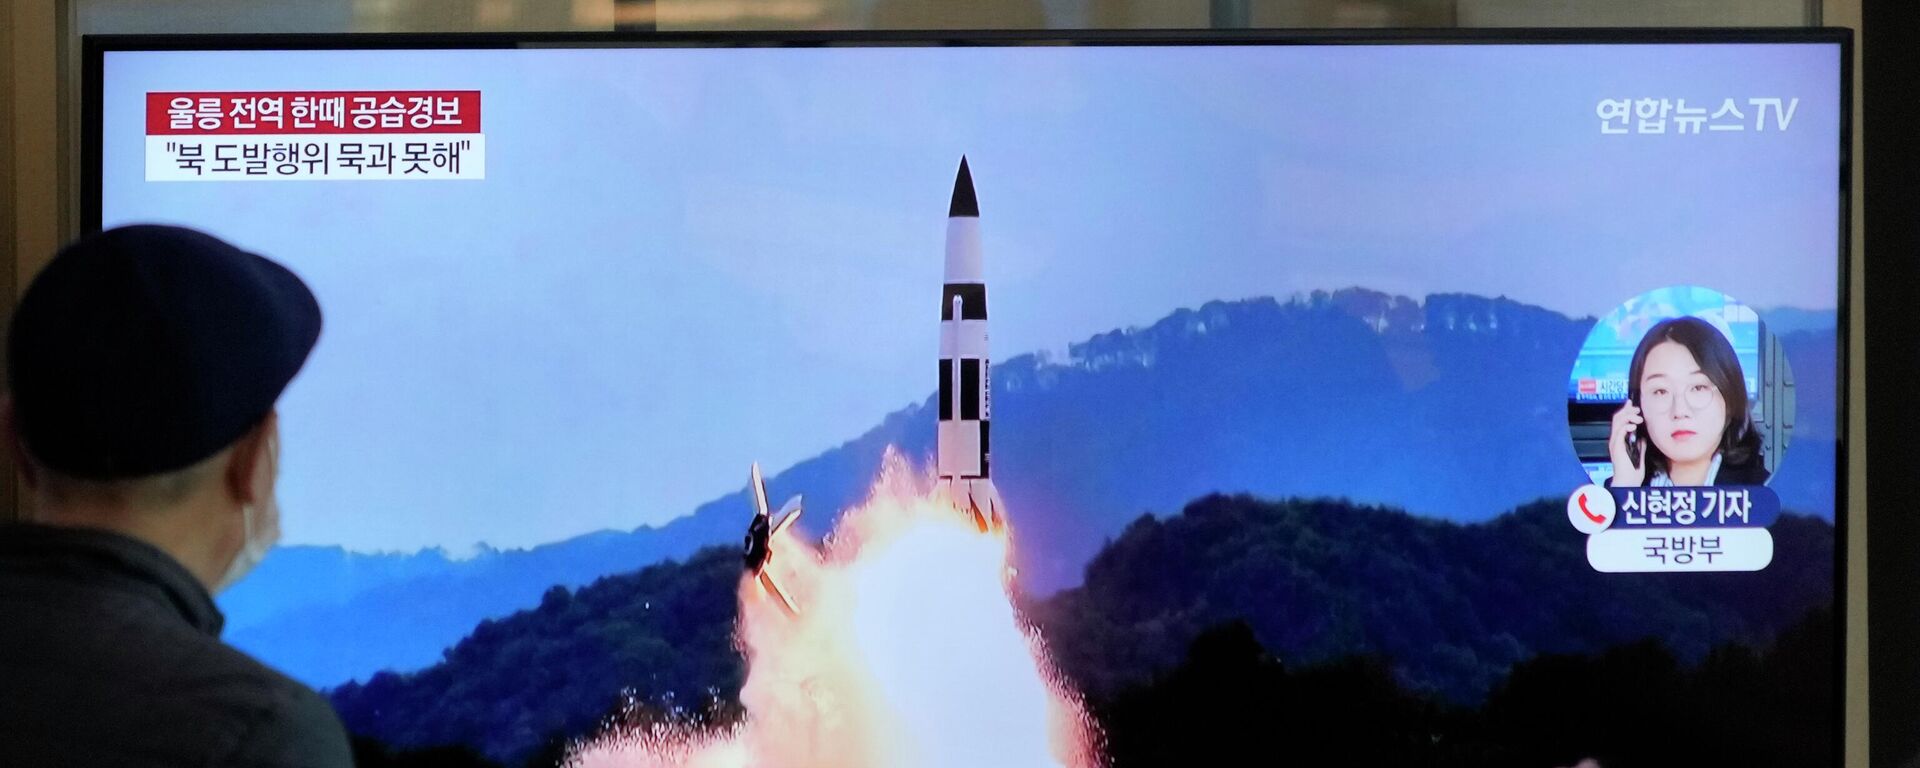 A TV screen shows a file image of North Korea's missile launch during a news program at the Seoul Railway Station in Seoul, South Korea, Wednesday, Nov. 2, 2022. South Korea says it has issued an air raid alert for residents on an island off its eastern coast after North Korea fired a few missiles toward the sea - Sputnik International, 1920, 23.02.2023